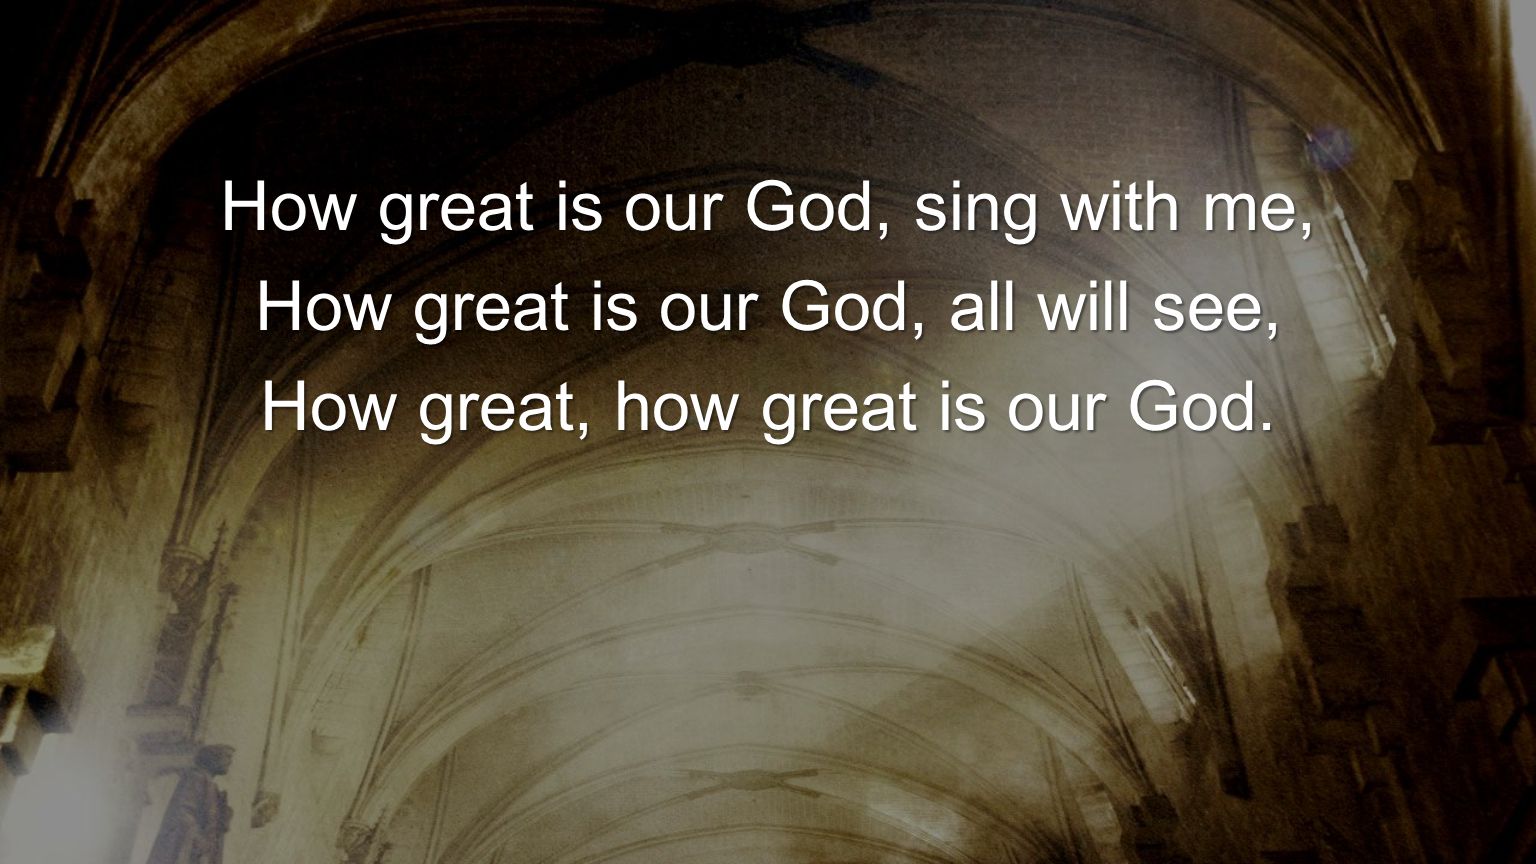 How great is our God, sing with me,